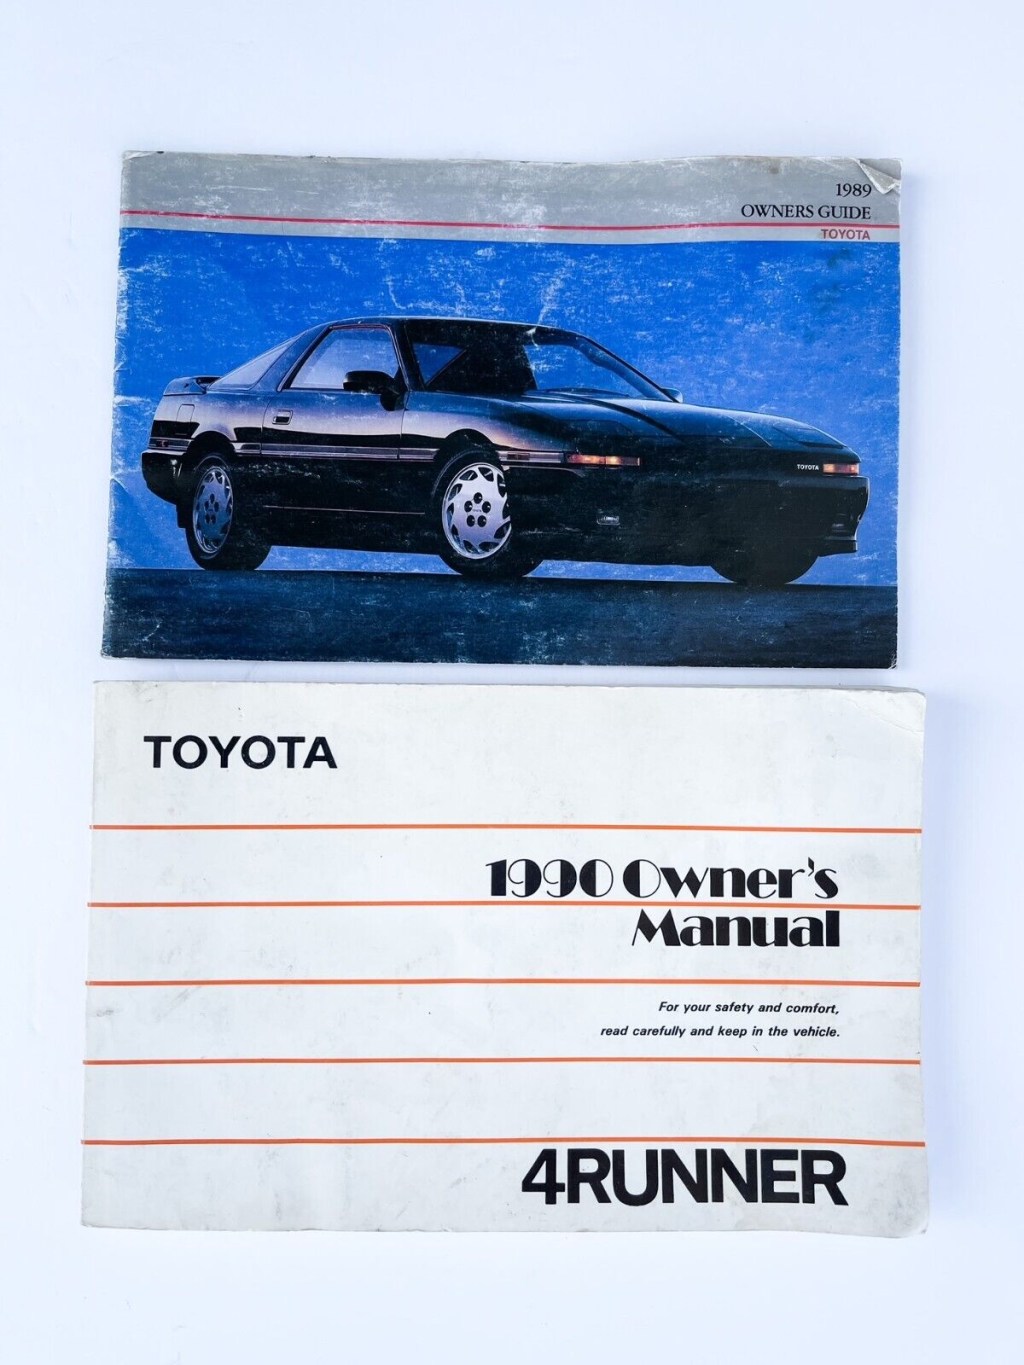 Picture of: TOYOTA RUNNER OWNERS MANUAL AND TOYOTA OWNERS GUIDE